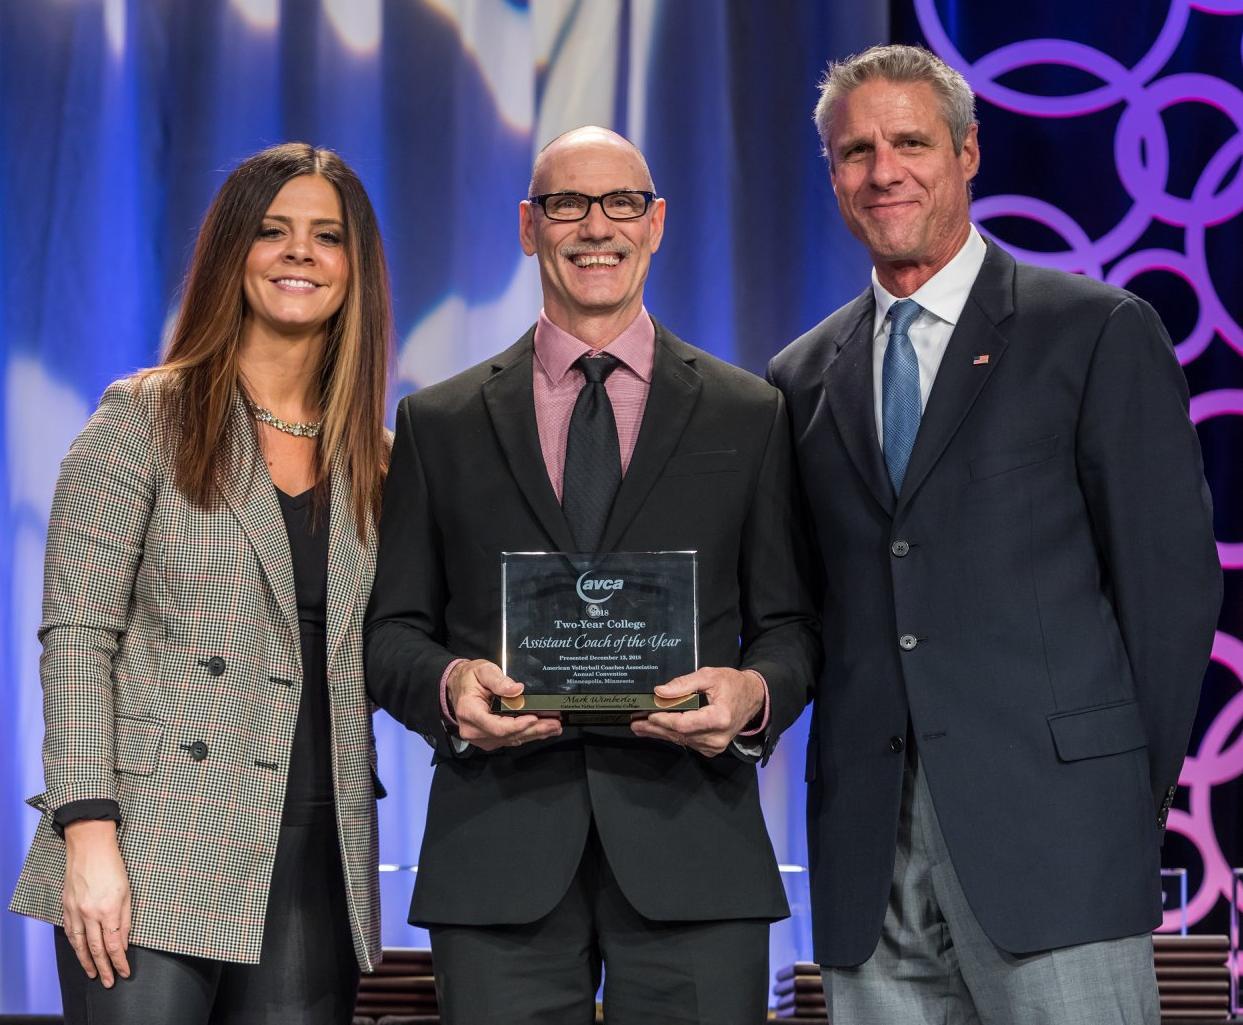 Wimberley receives his AVCA Two-Year National Assistant Coach of the Year award.